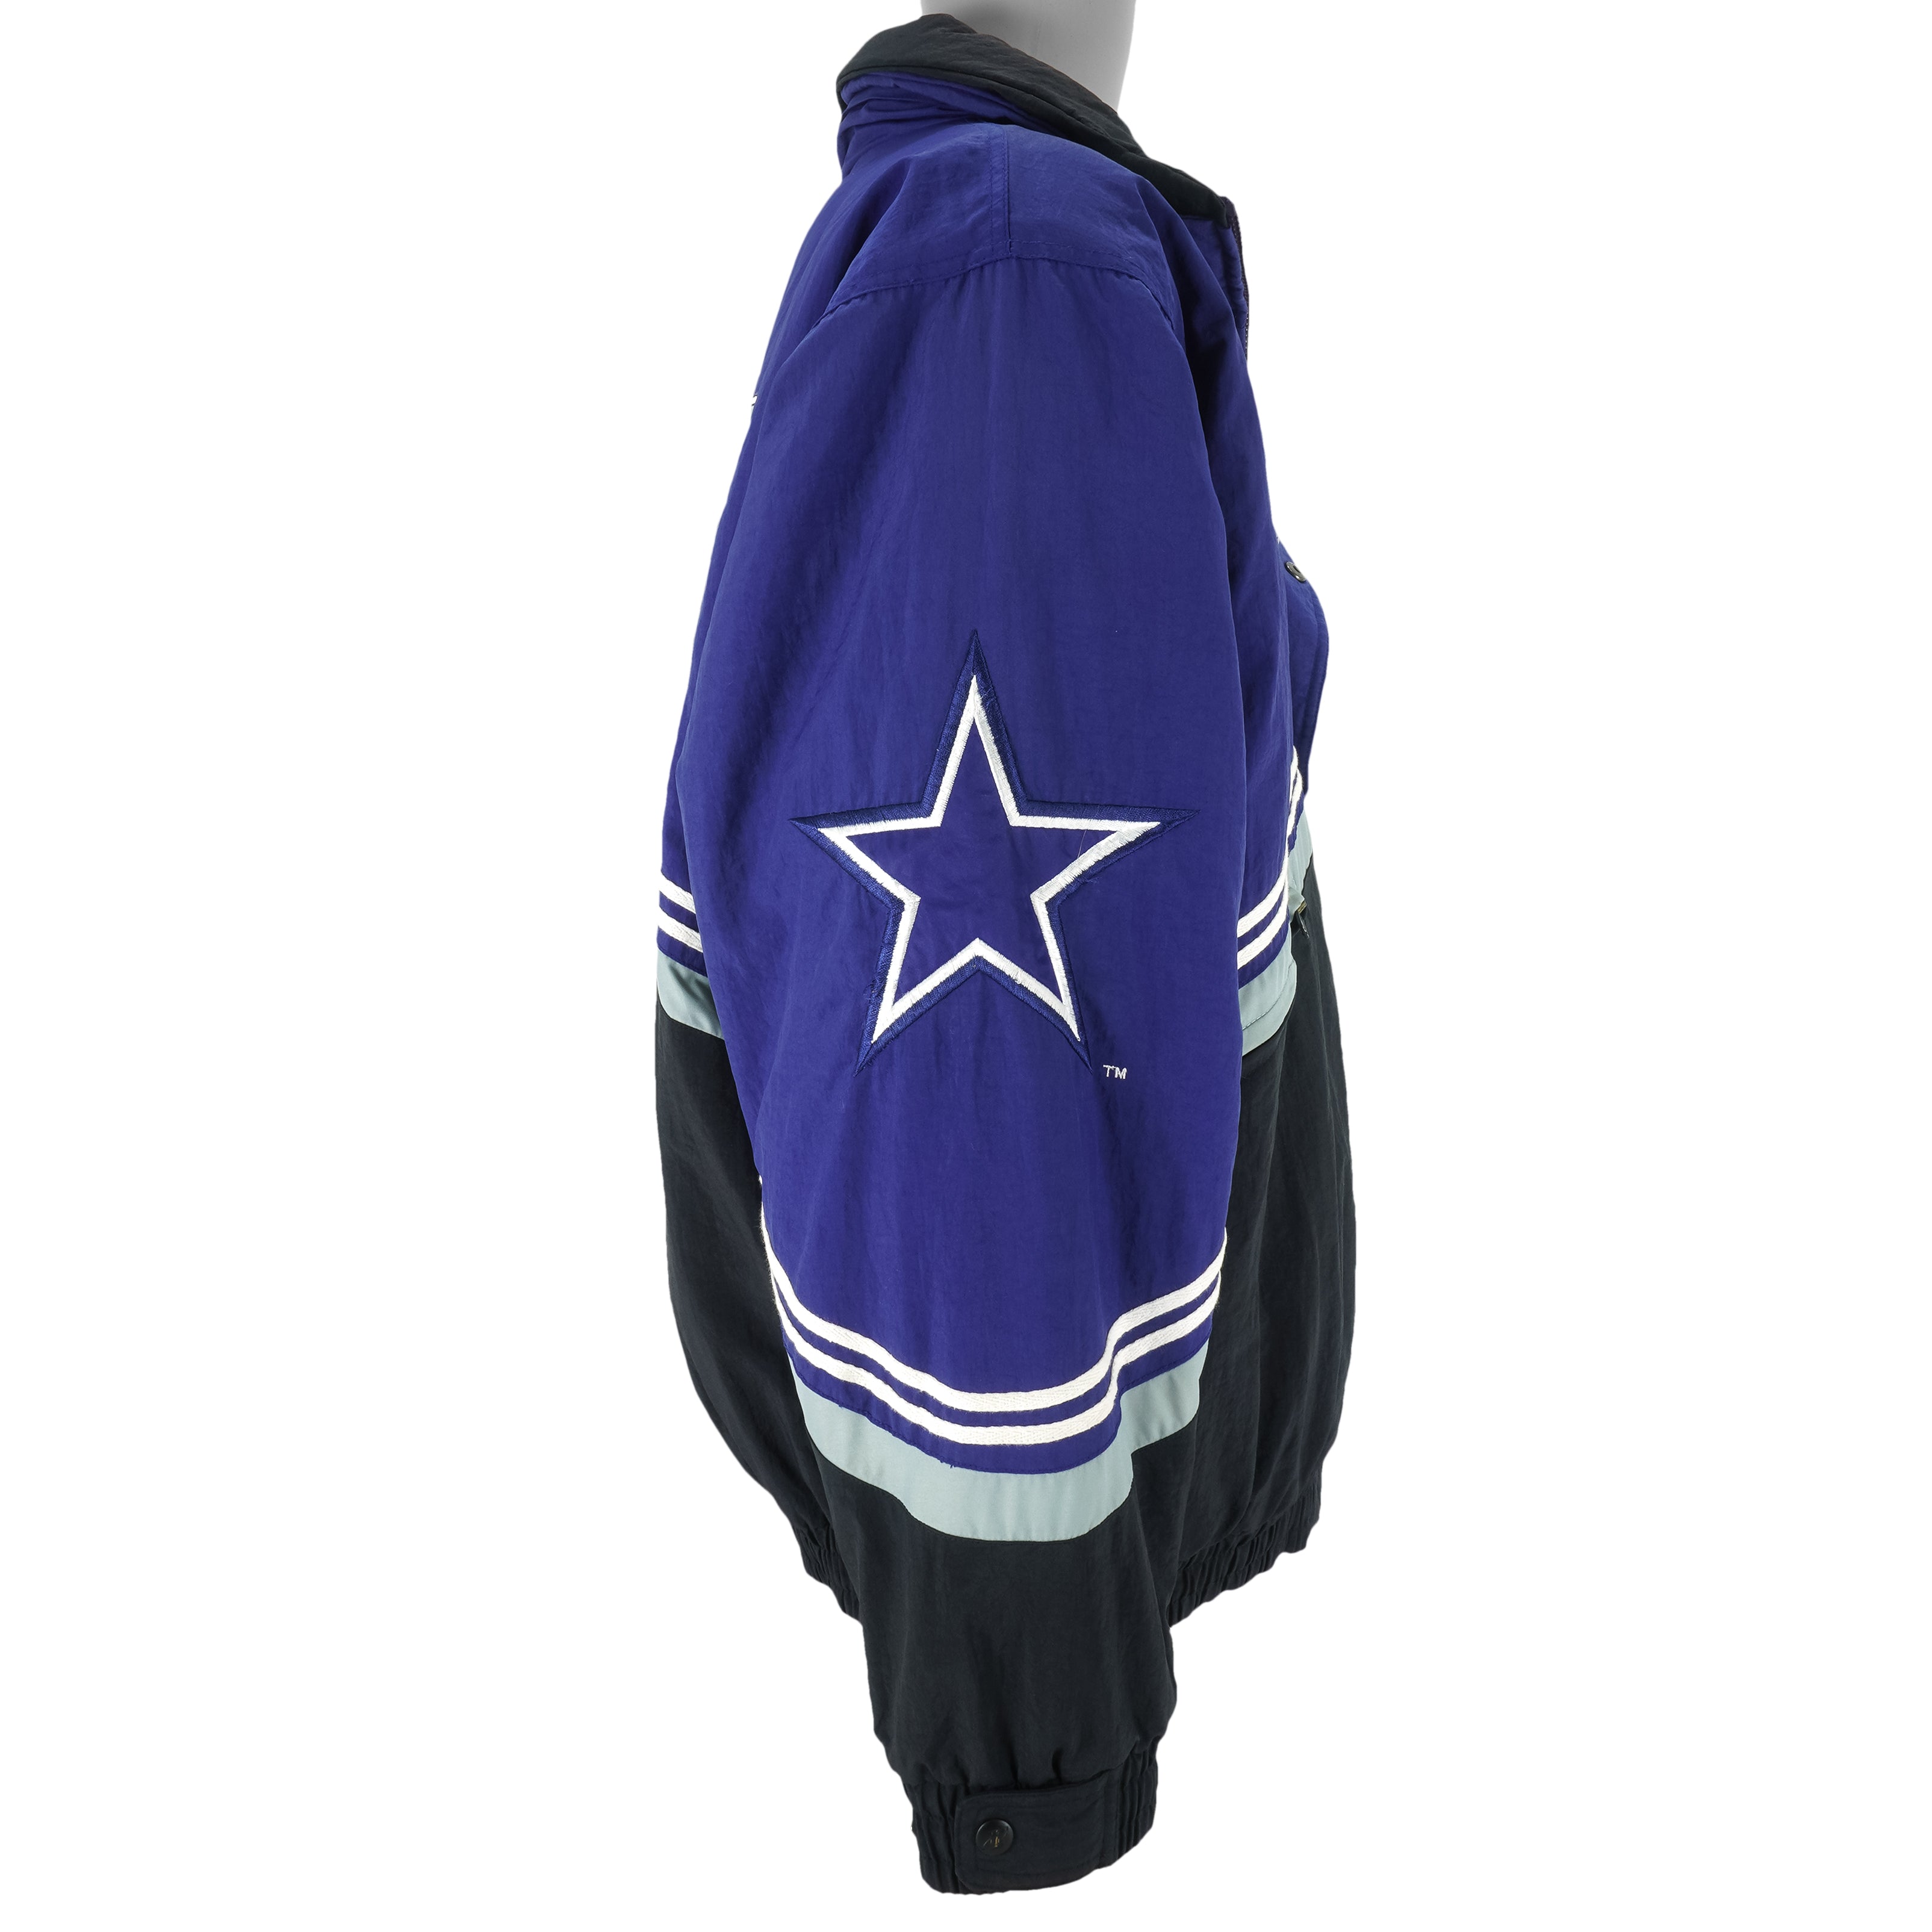 Vintage NFL Dallas Cowboys Jacket Size Large Made in USA